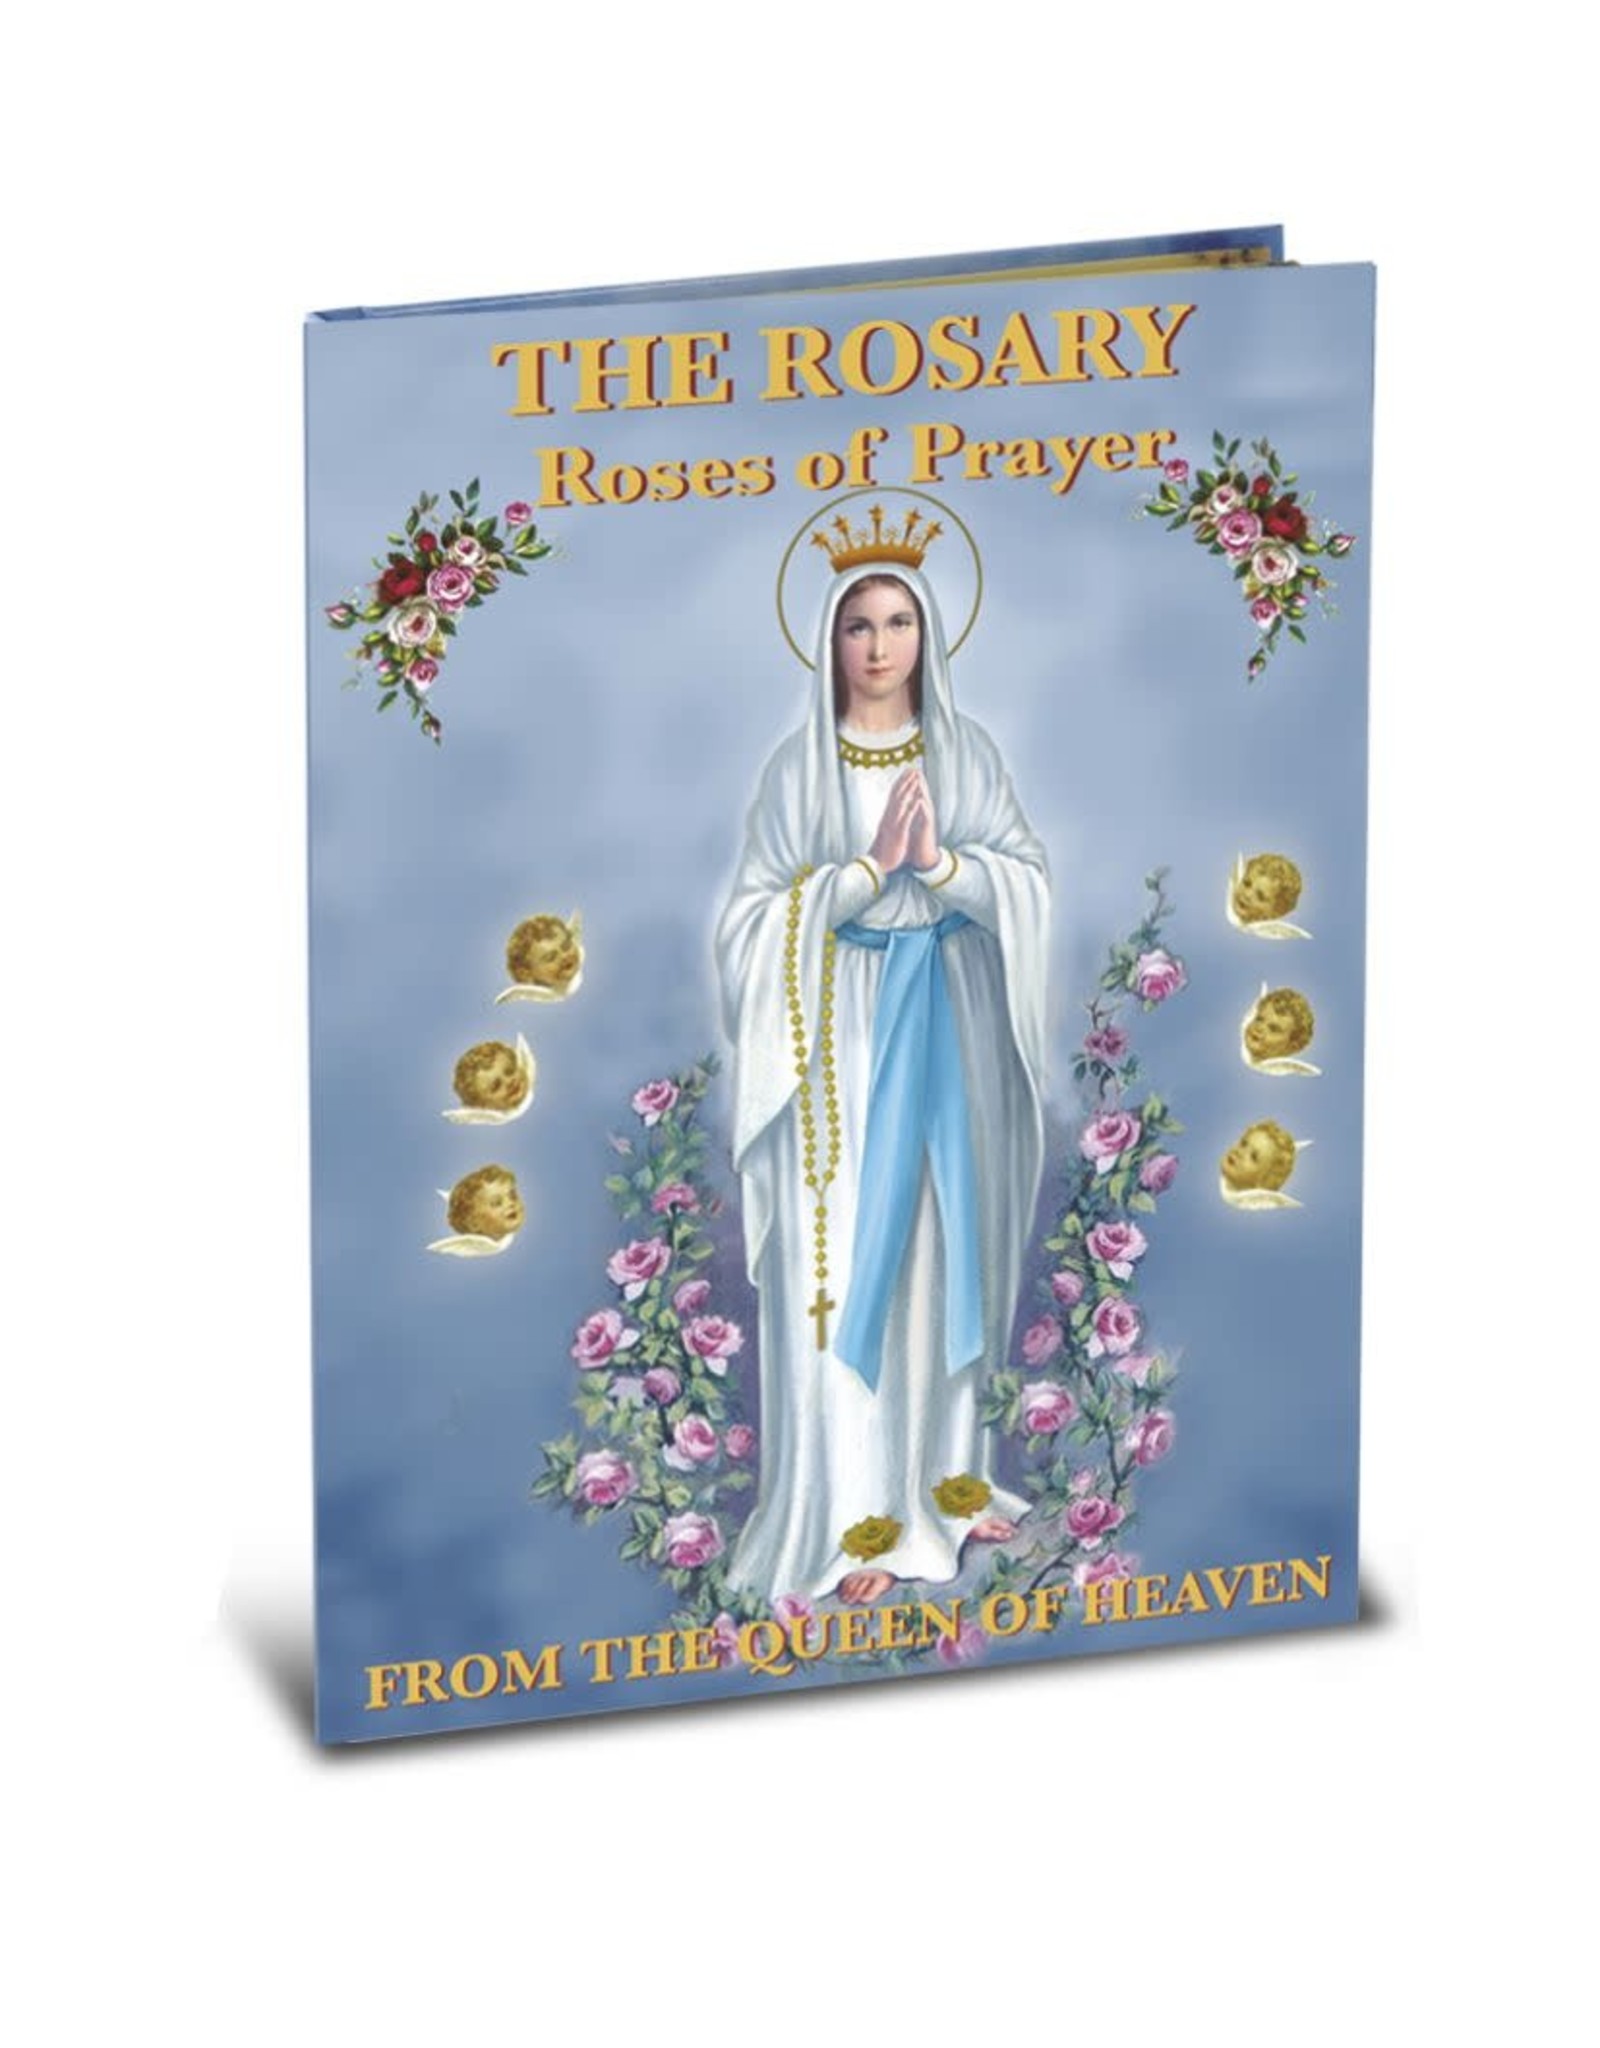 Hirten The Rosary: Roses of Prayer From the Queen of Heaven (Hardcover)